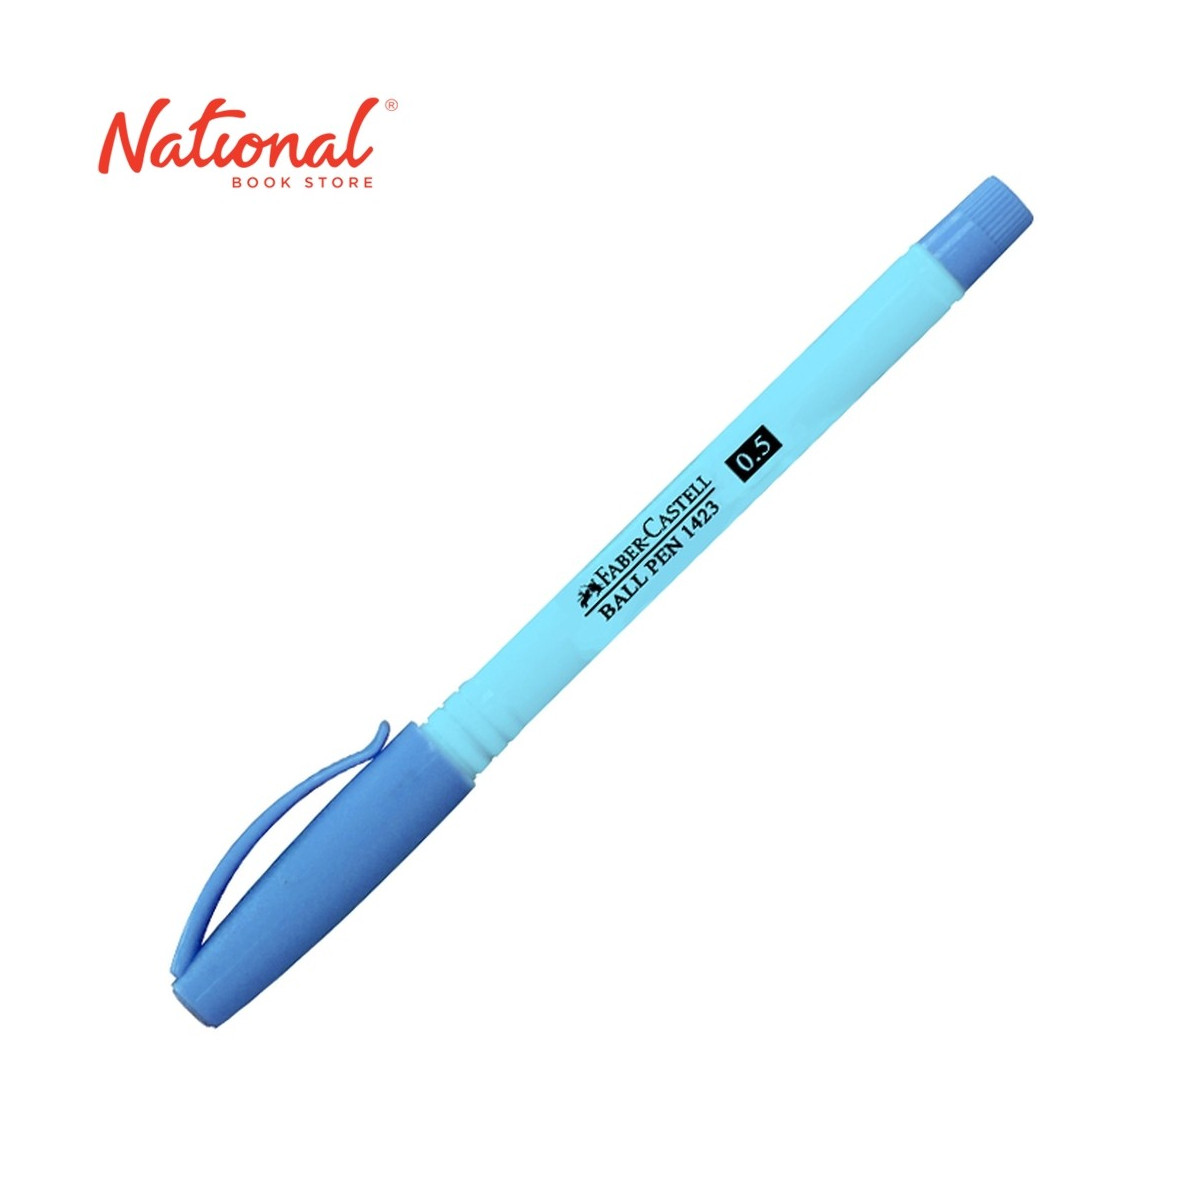 FABER CASTELL BALLPOINT STICK 142340 TURQUOISE/BLACK INK